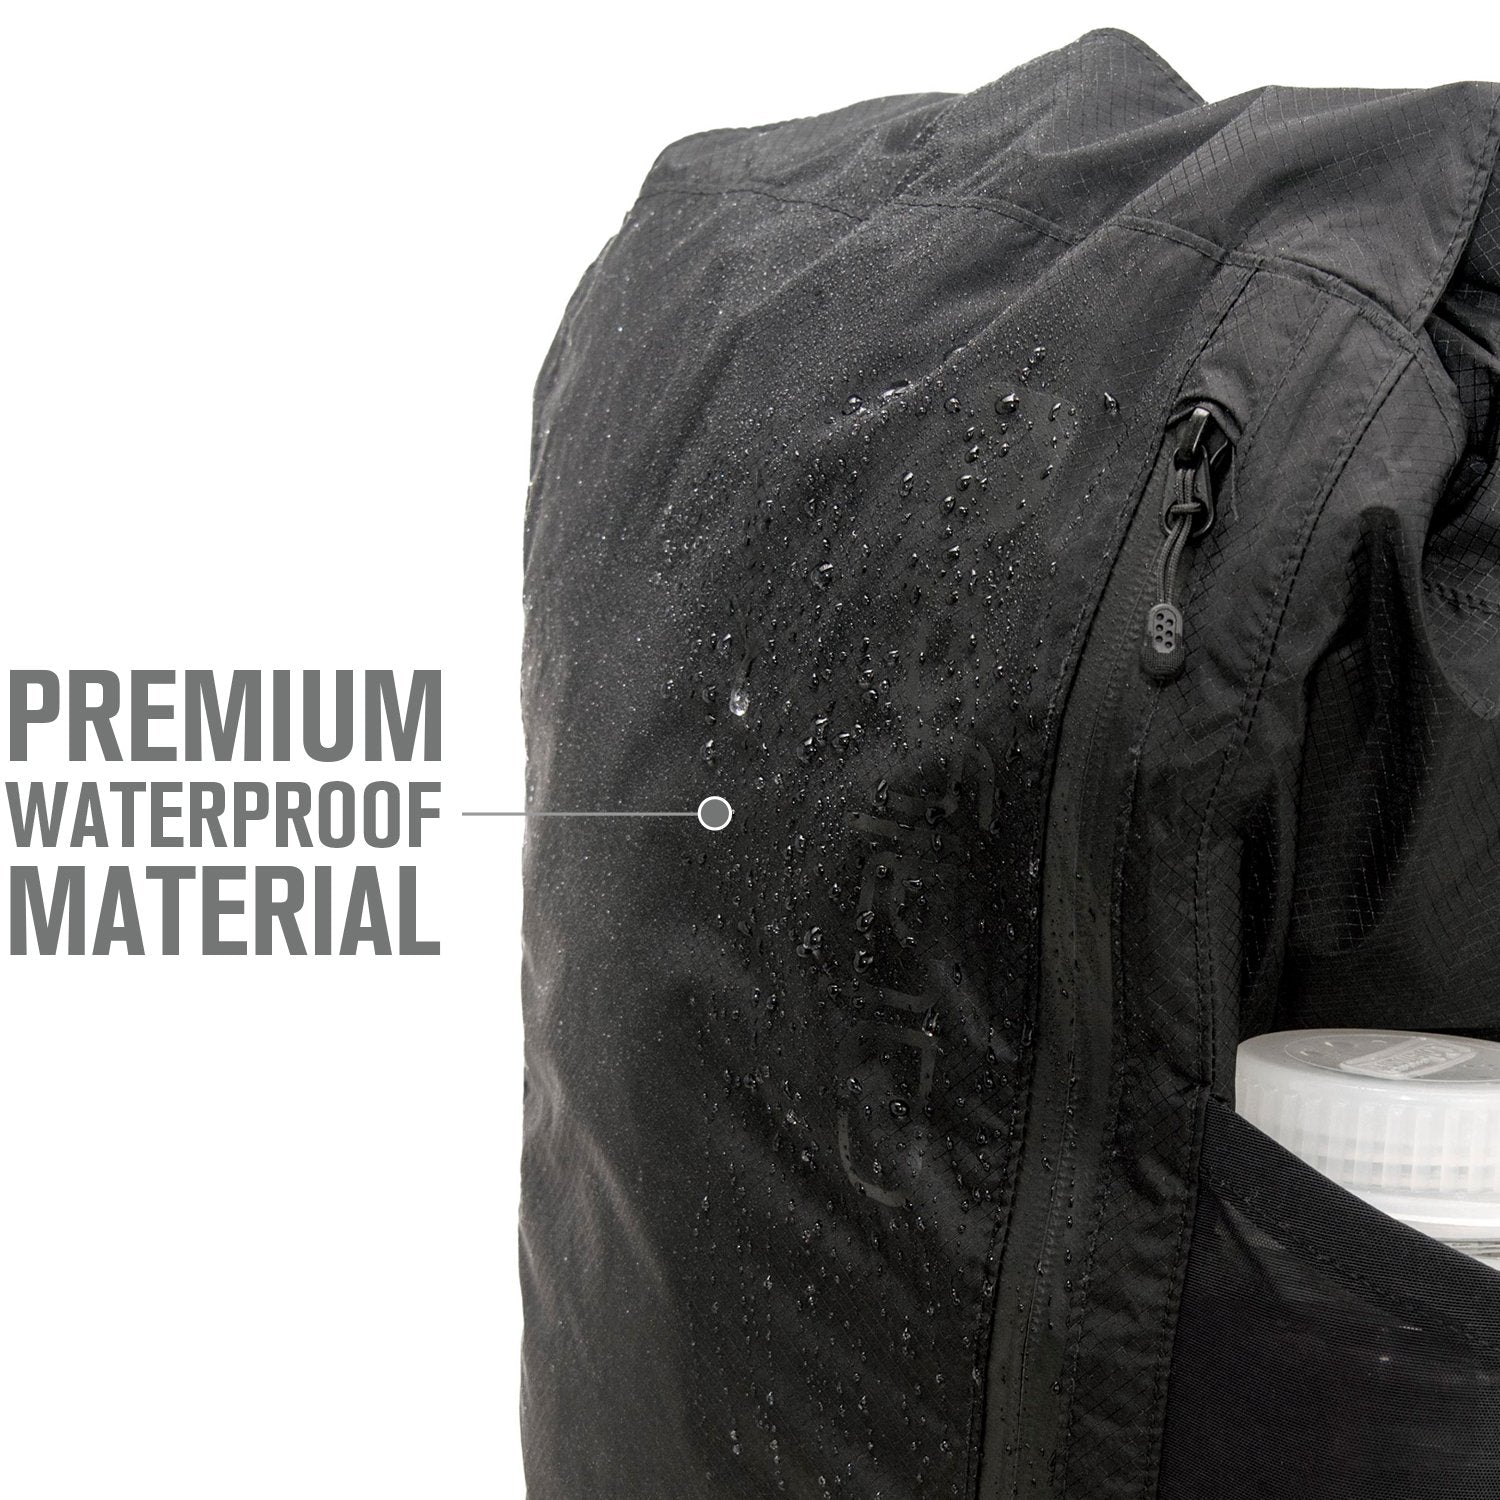 catalyst waterproof 20l backpack with droplets of water text reads premium waterproof material